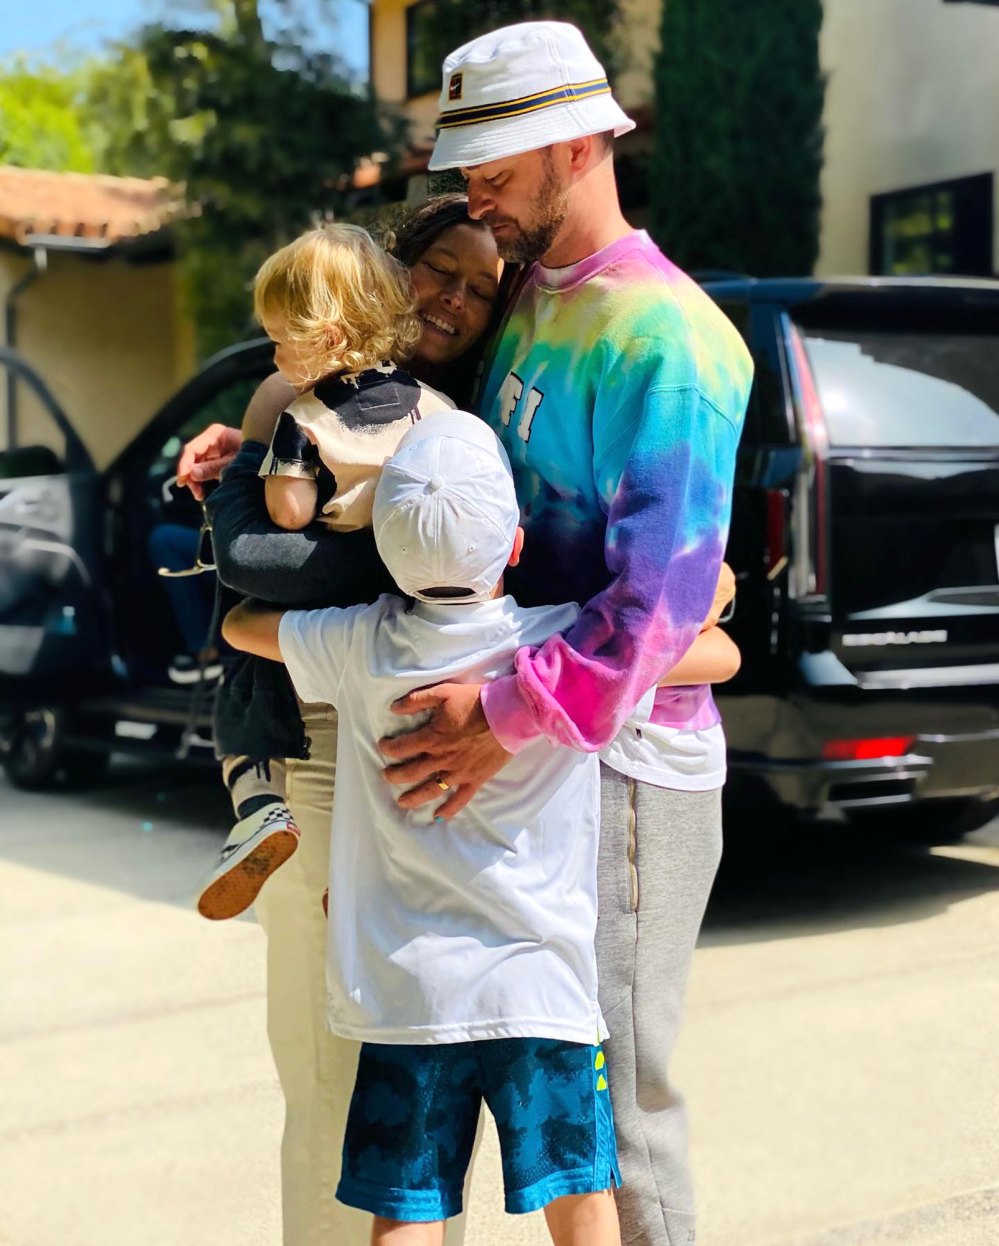 Justin Timberlake Jokes 'Wonderful' Sons Are 'Going to Be the Death of Me': 'I'm Just Happy'